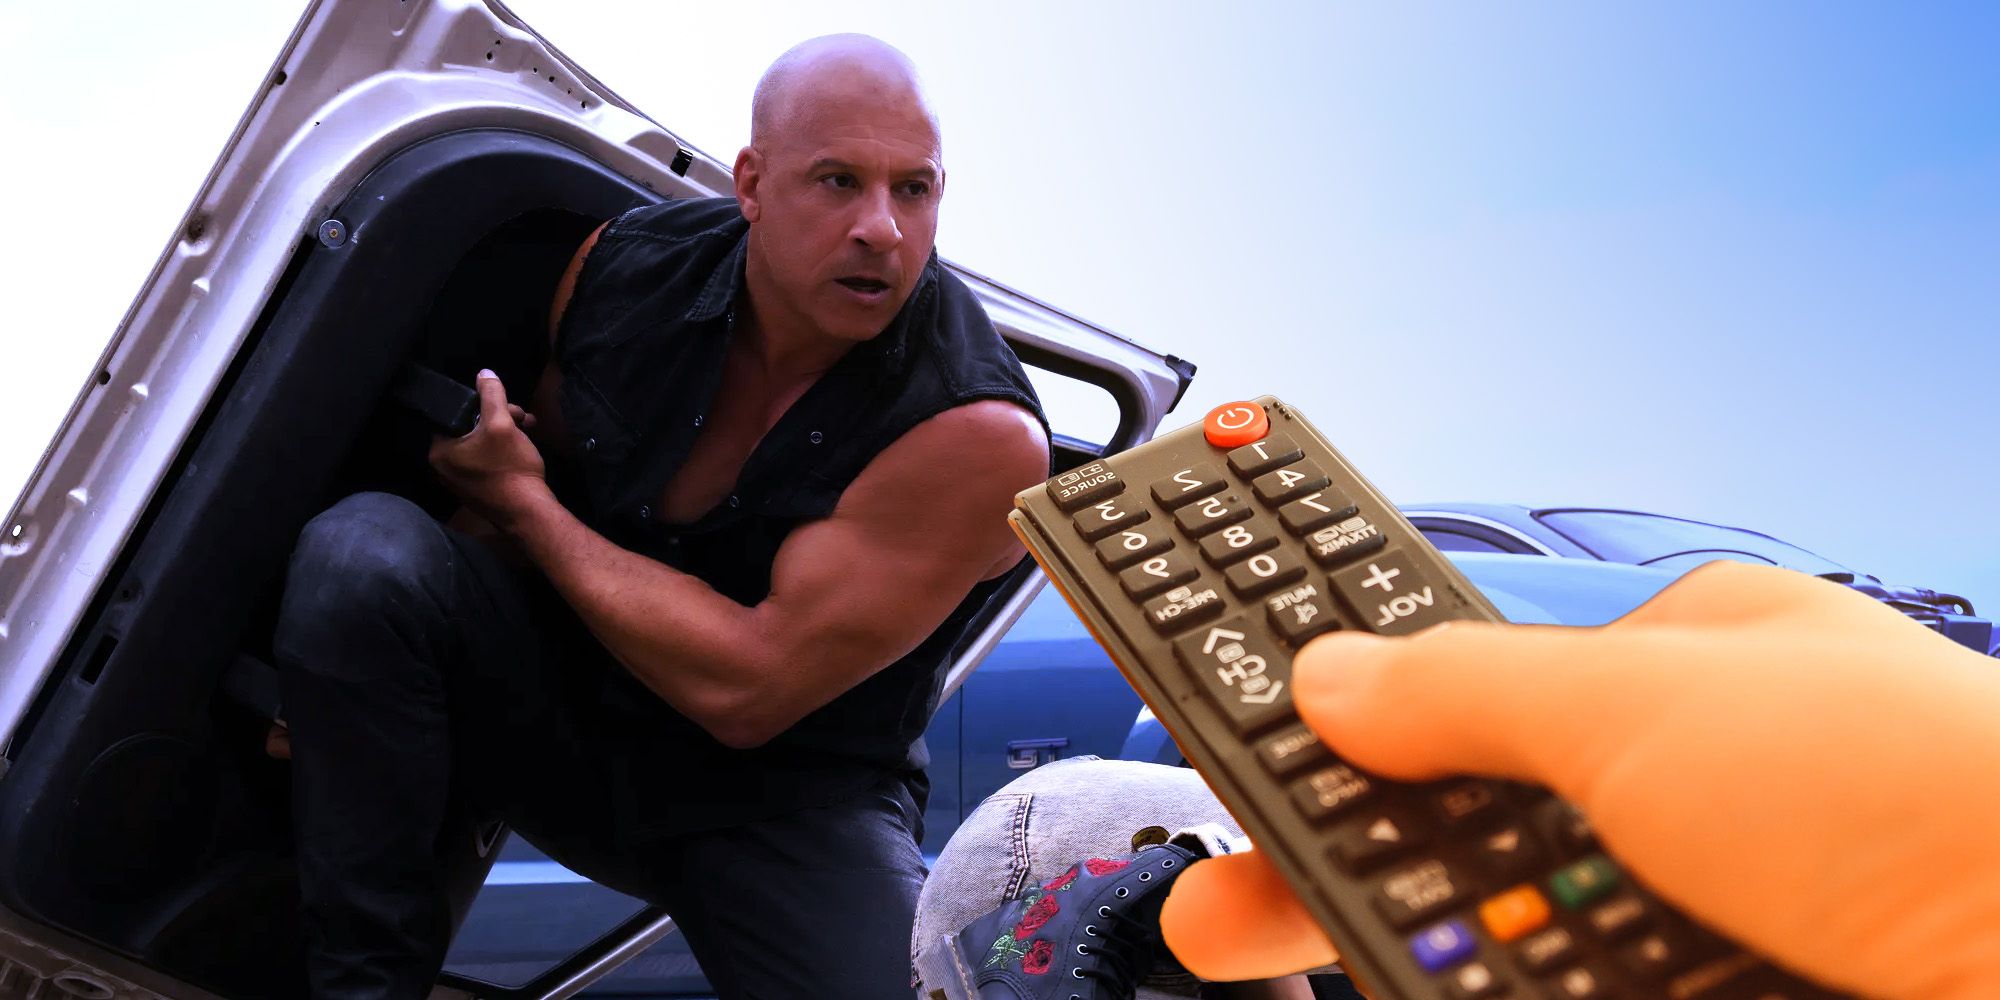 When Will Fast & Furious 10 Start Streaming?